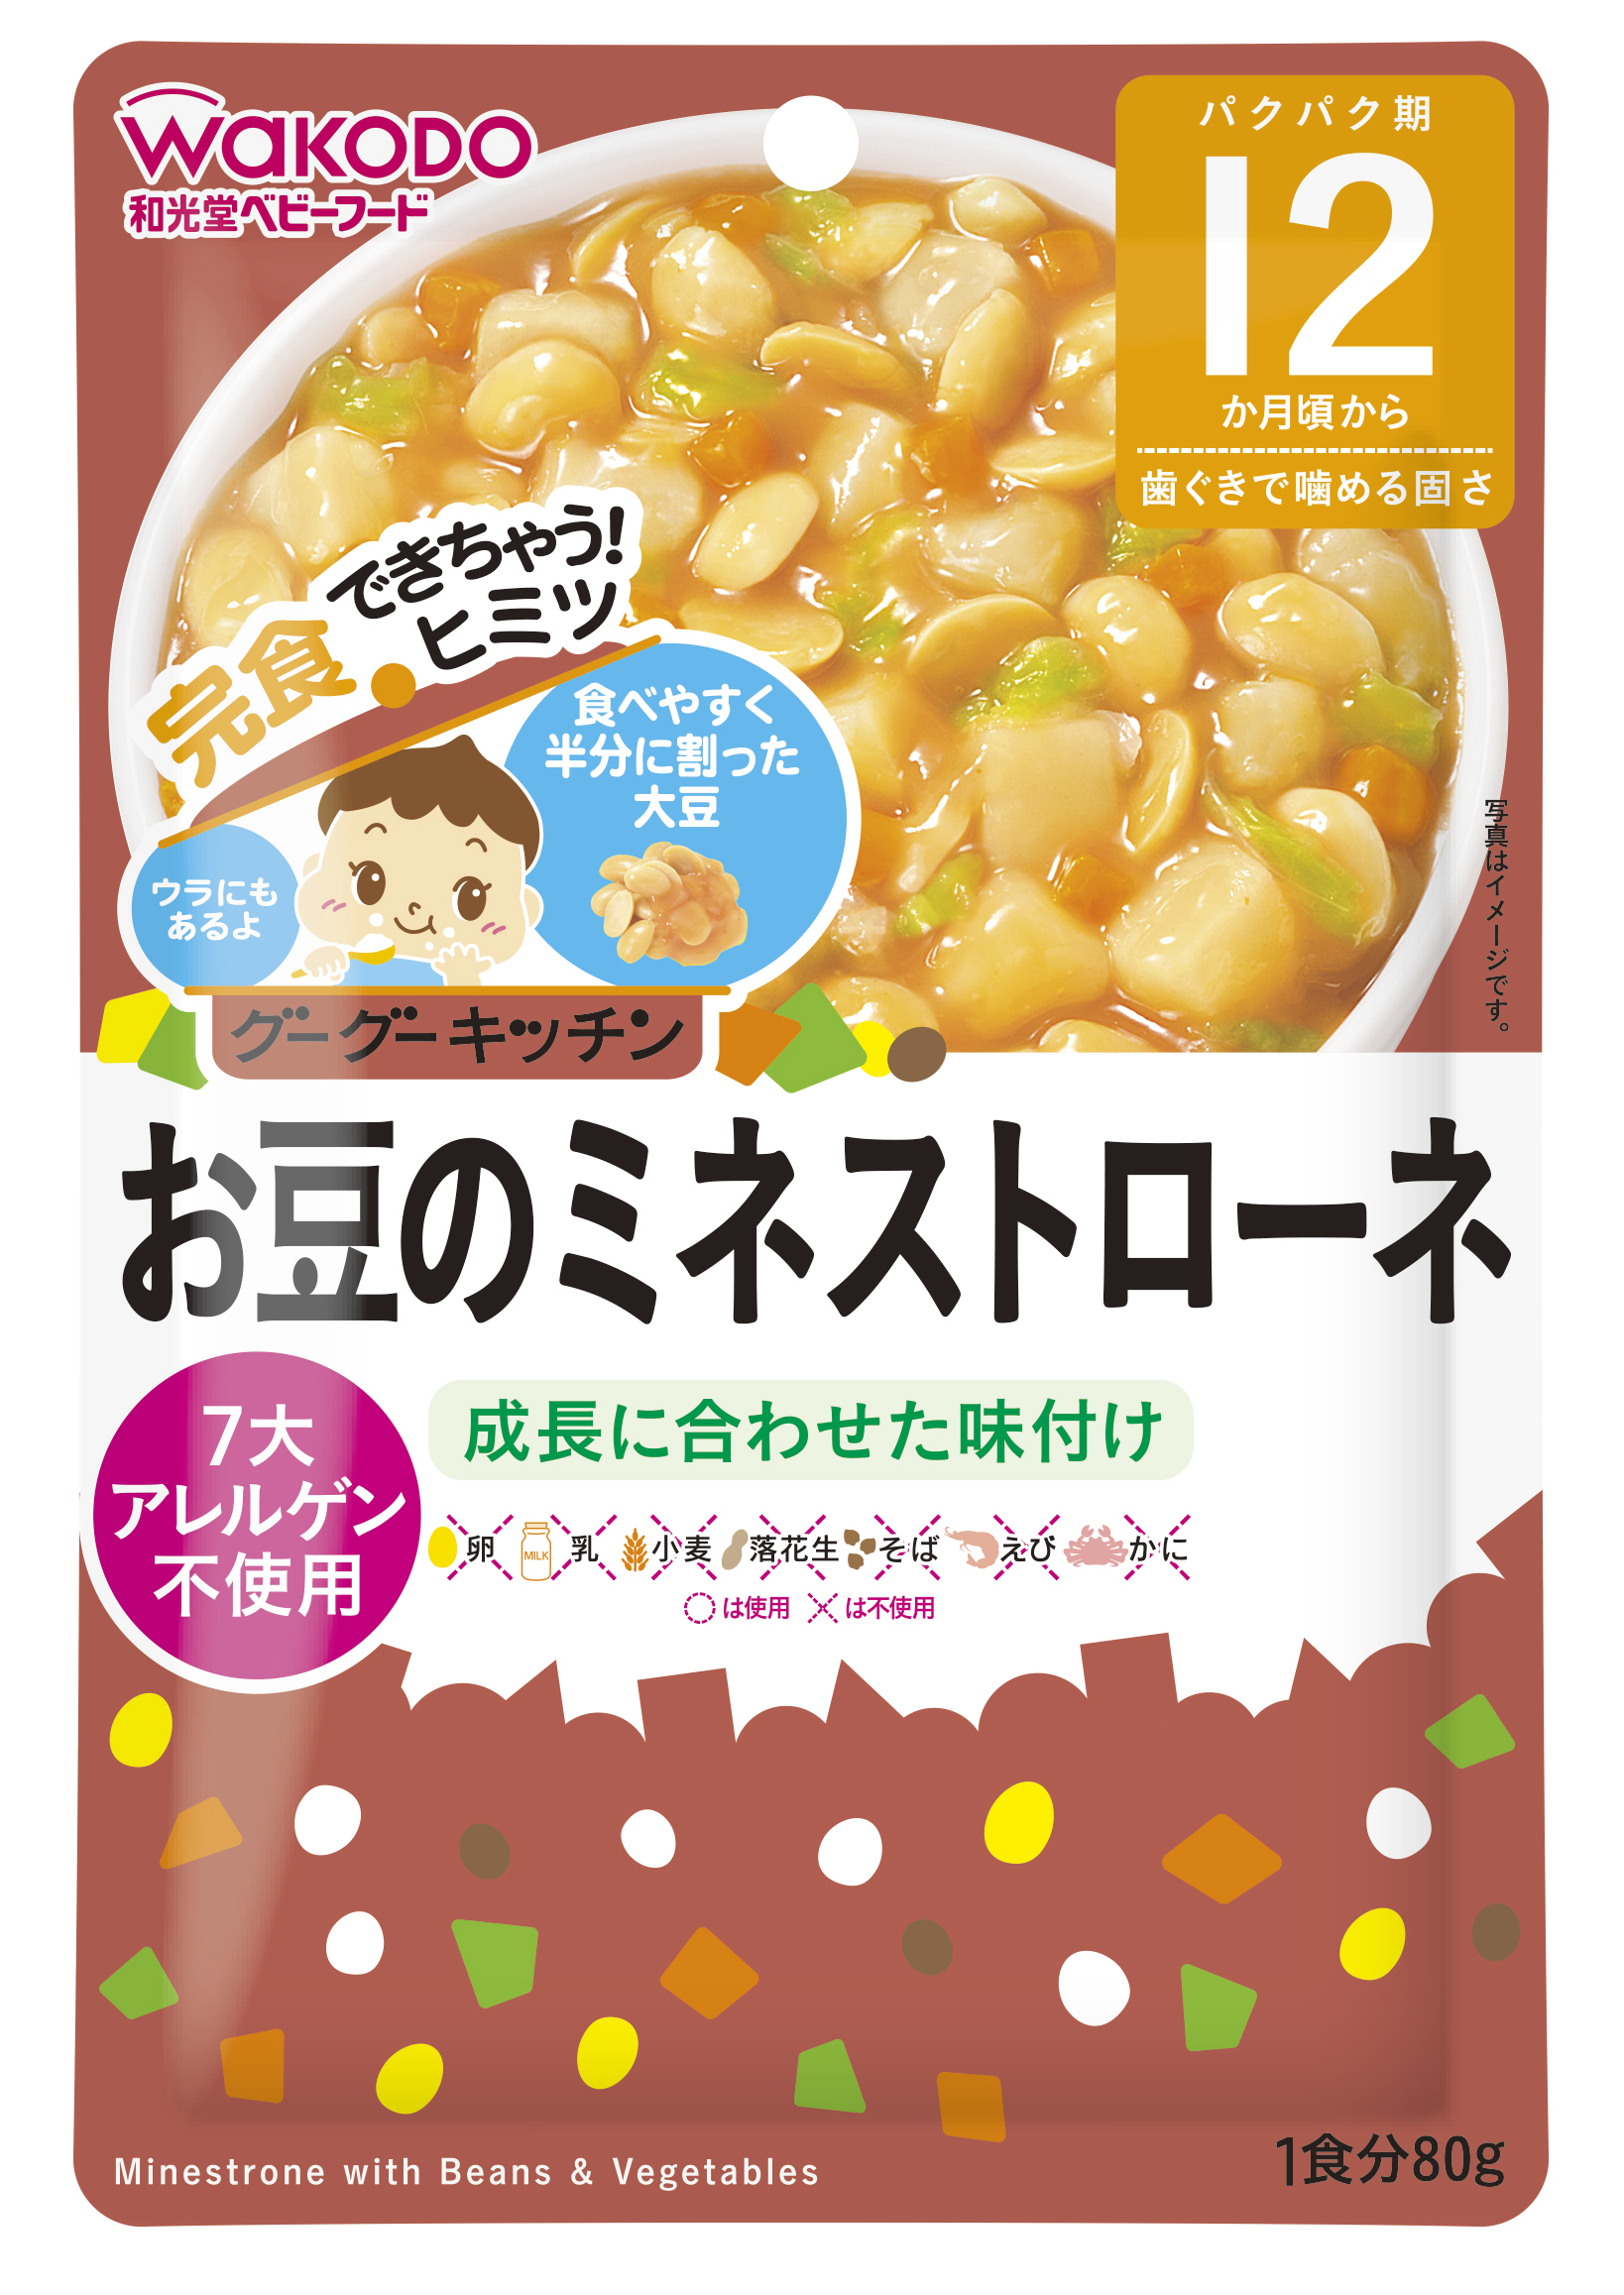 WAKODO Minestrone With Beans And Vegetables (Bundle of 12)